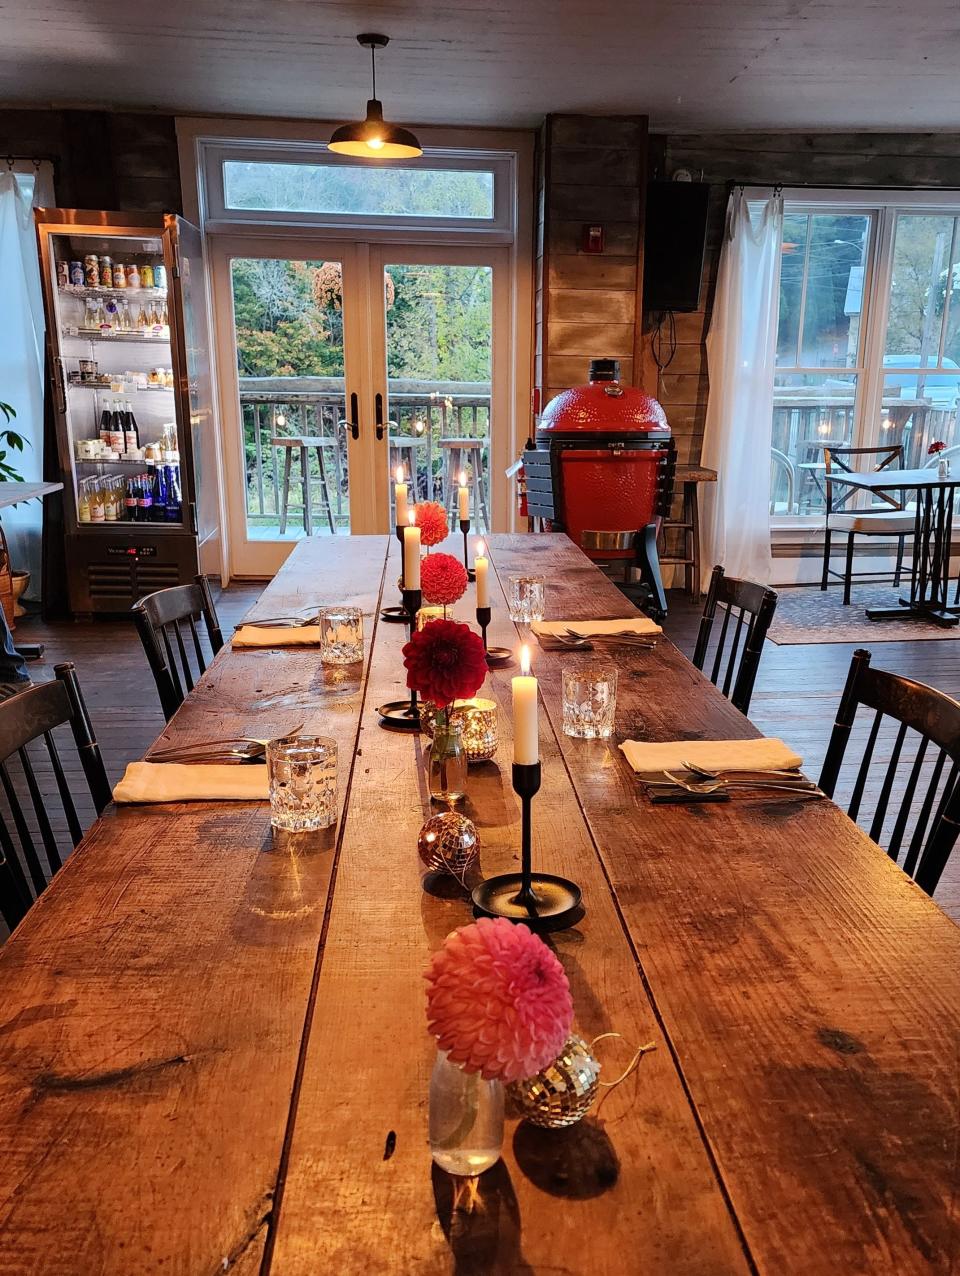 The dining table is rustic and cozy at the Black Goat Test Kitchen and Supperclub.